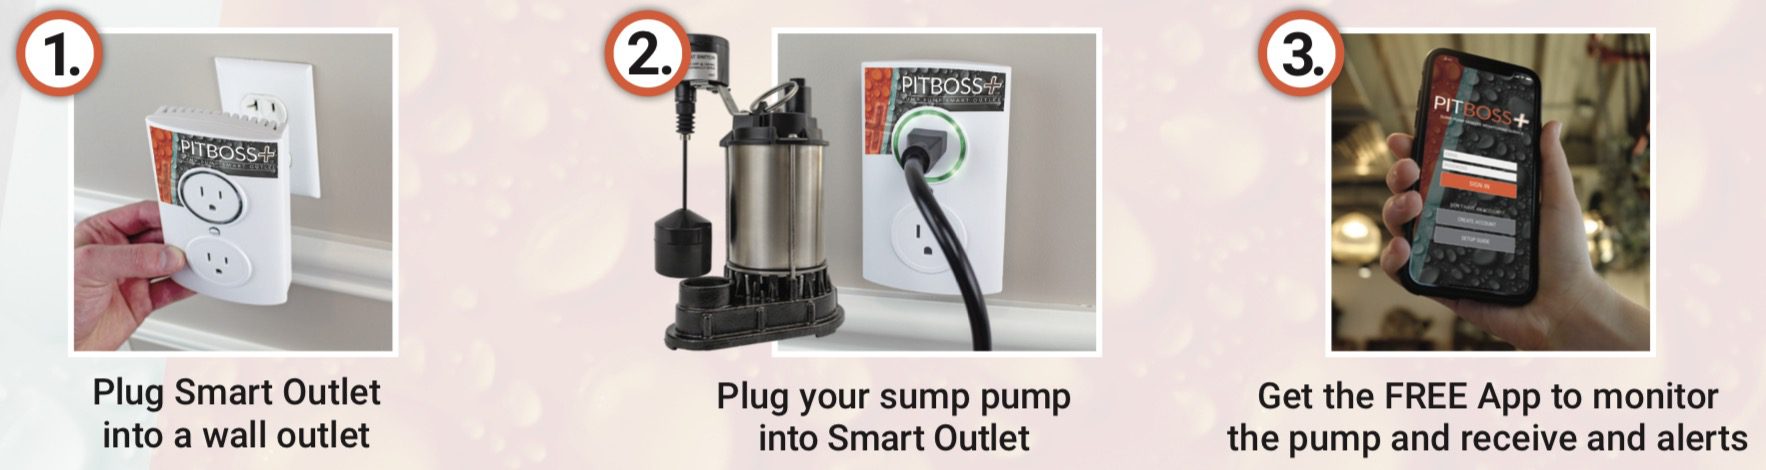 sump pump smart outlet three step process: plug smart outlet into wall, plug your sump pump into the smart outlet, get the FREE mobile app to monitor the pump and receive text alerts